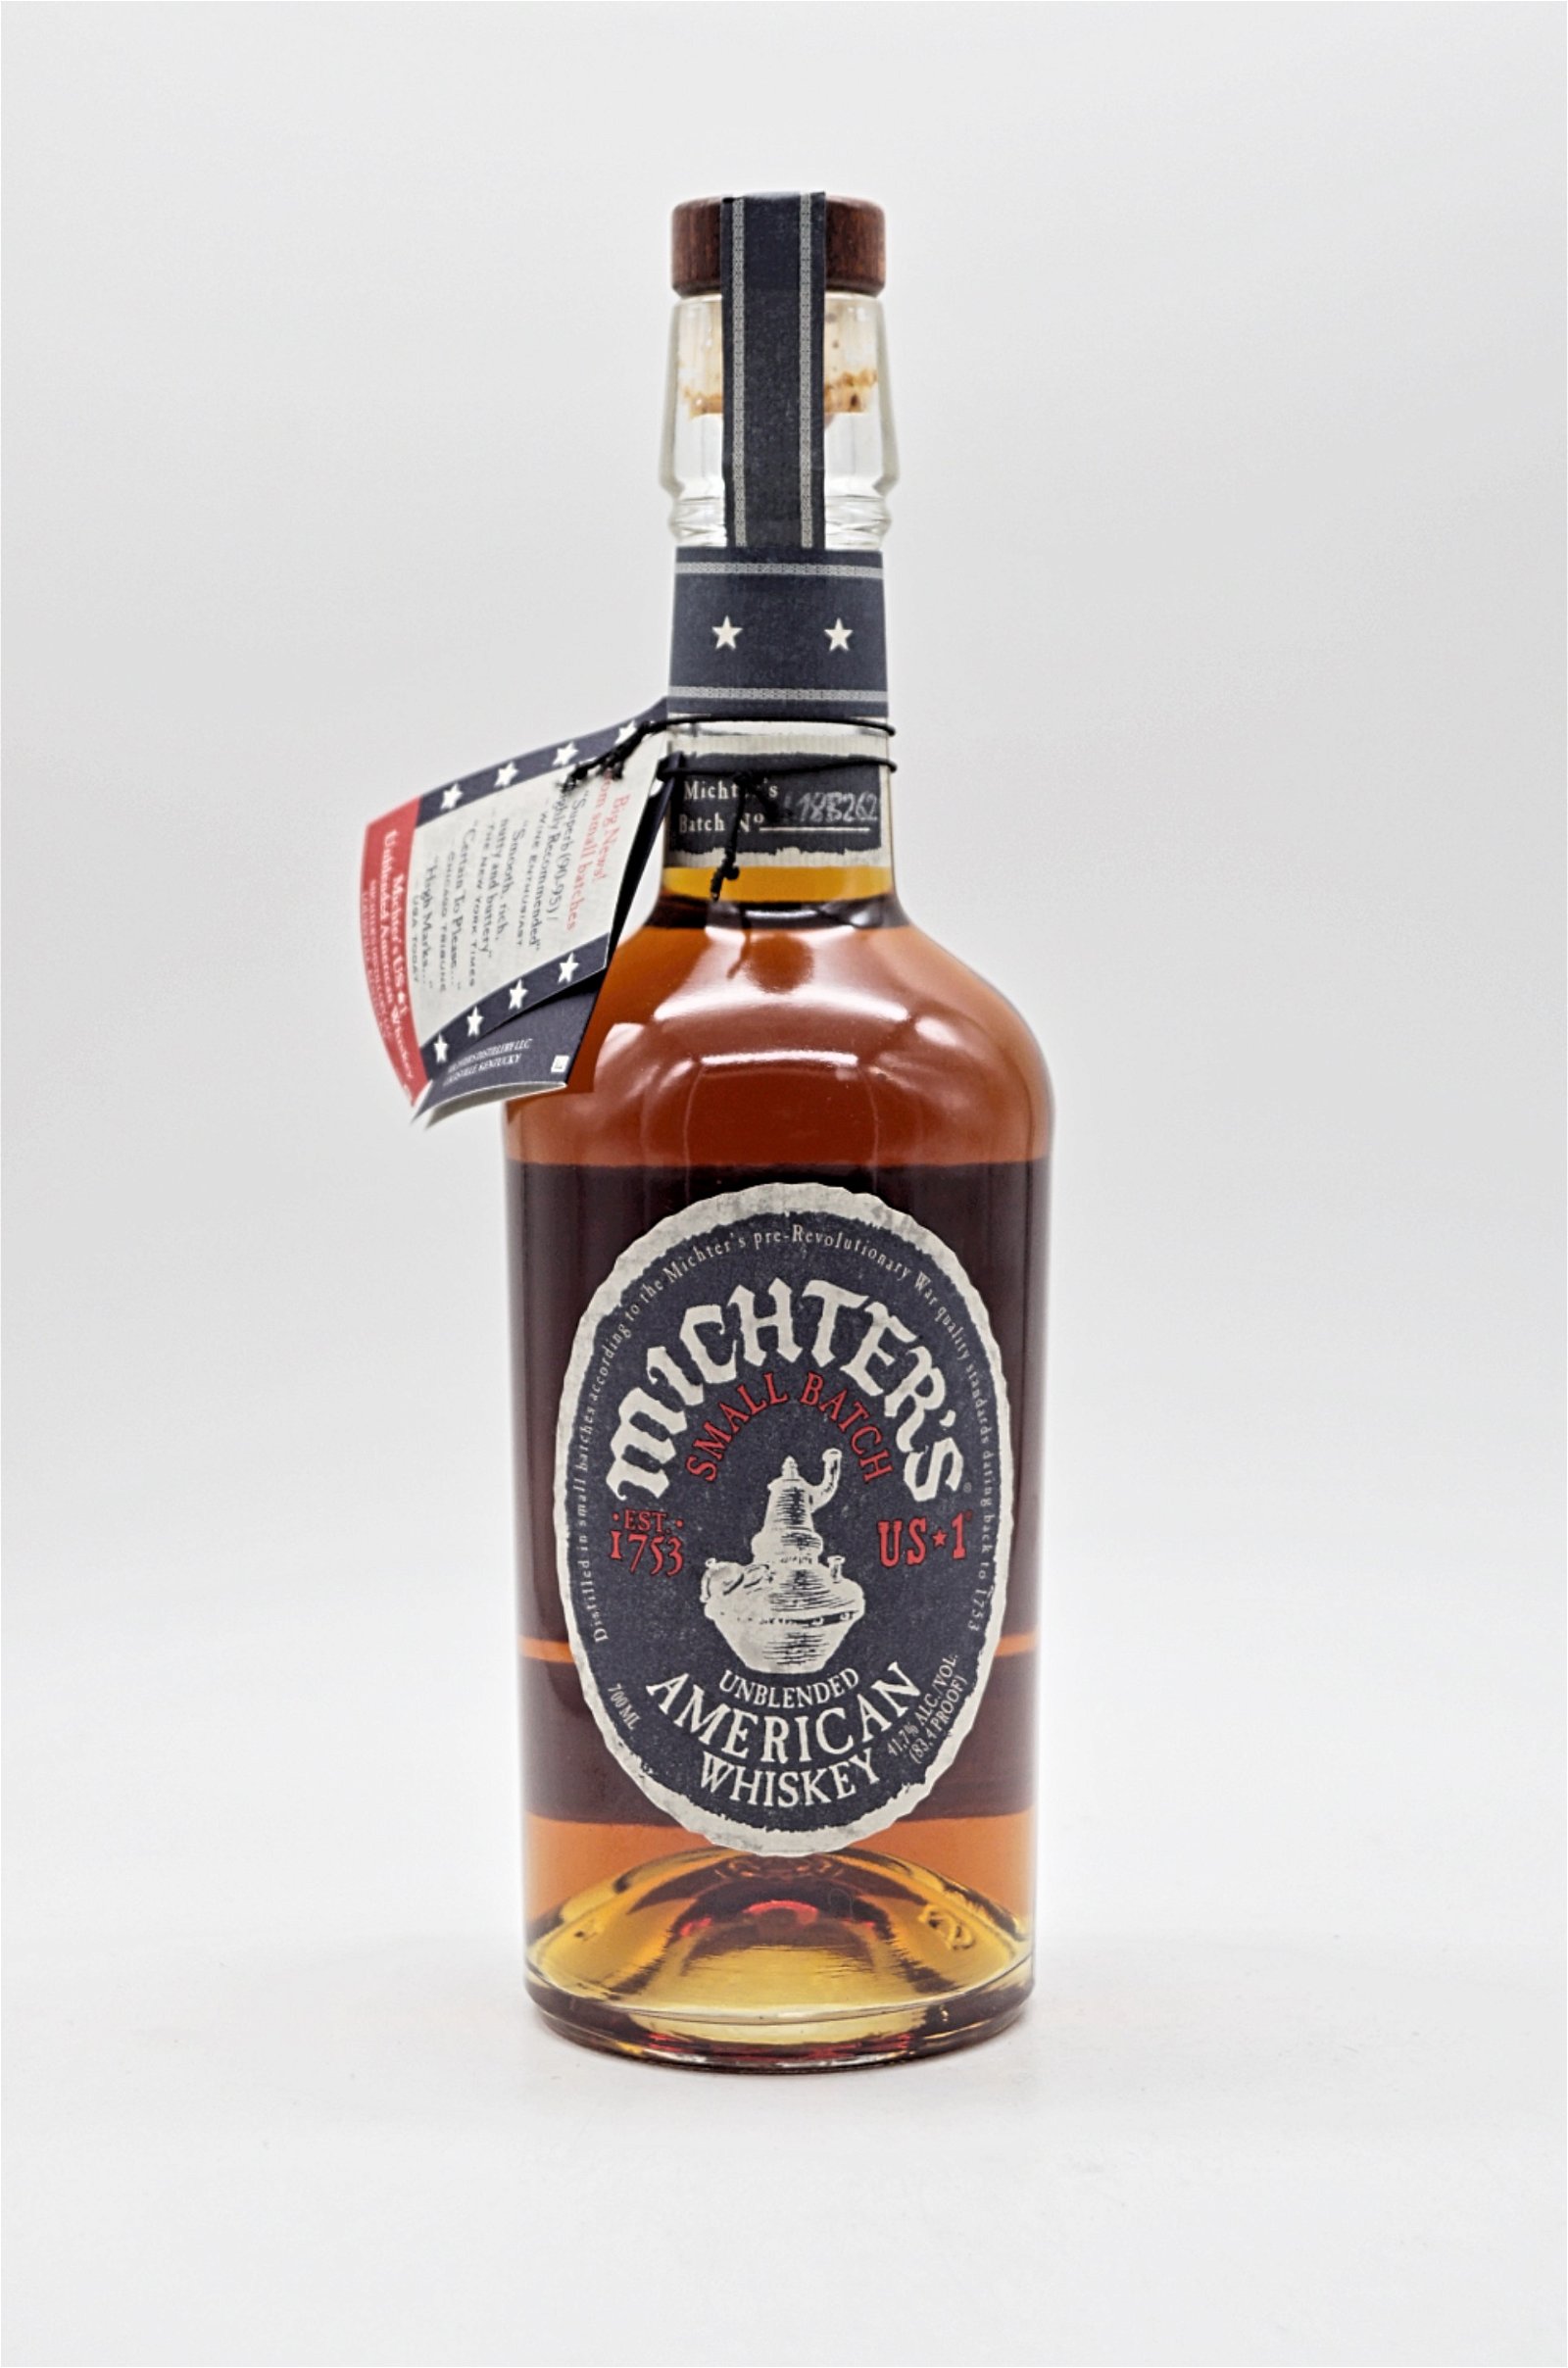 Michters US*1 Unblended American Whiskey 